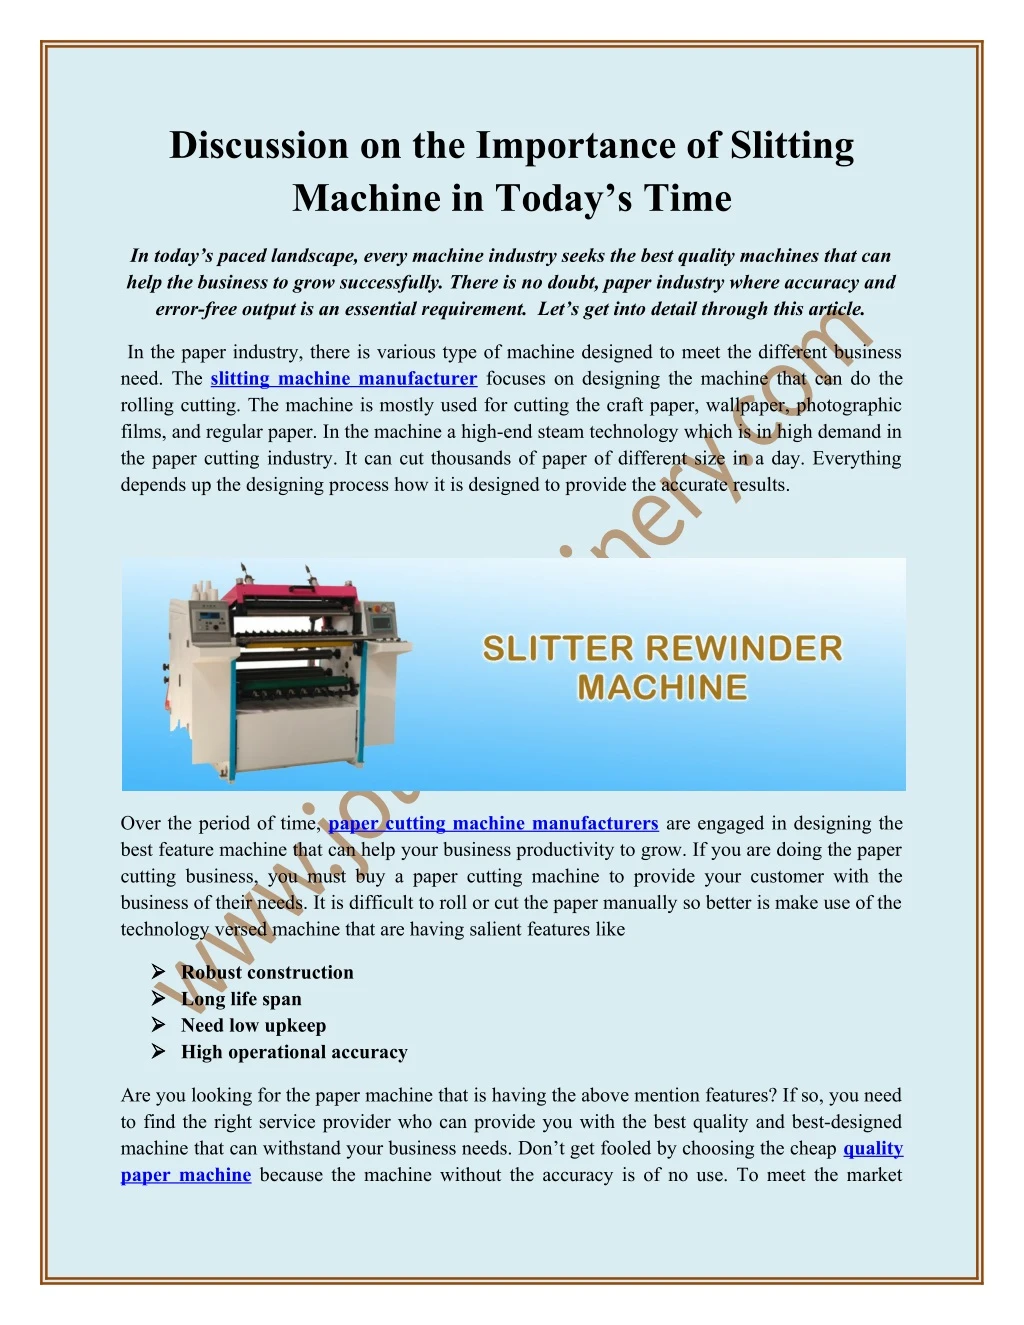 discussion on the importance of slitting machine